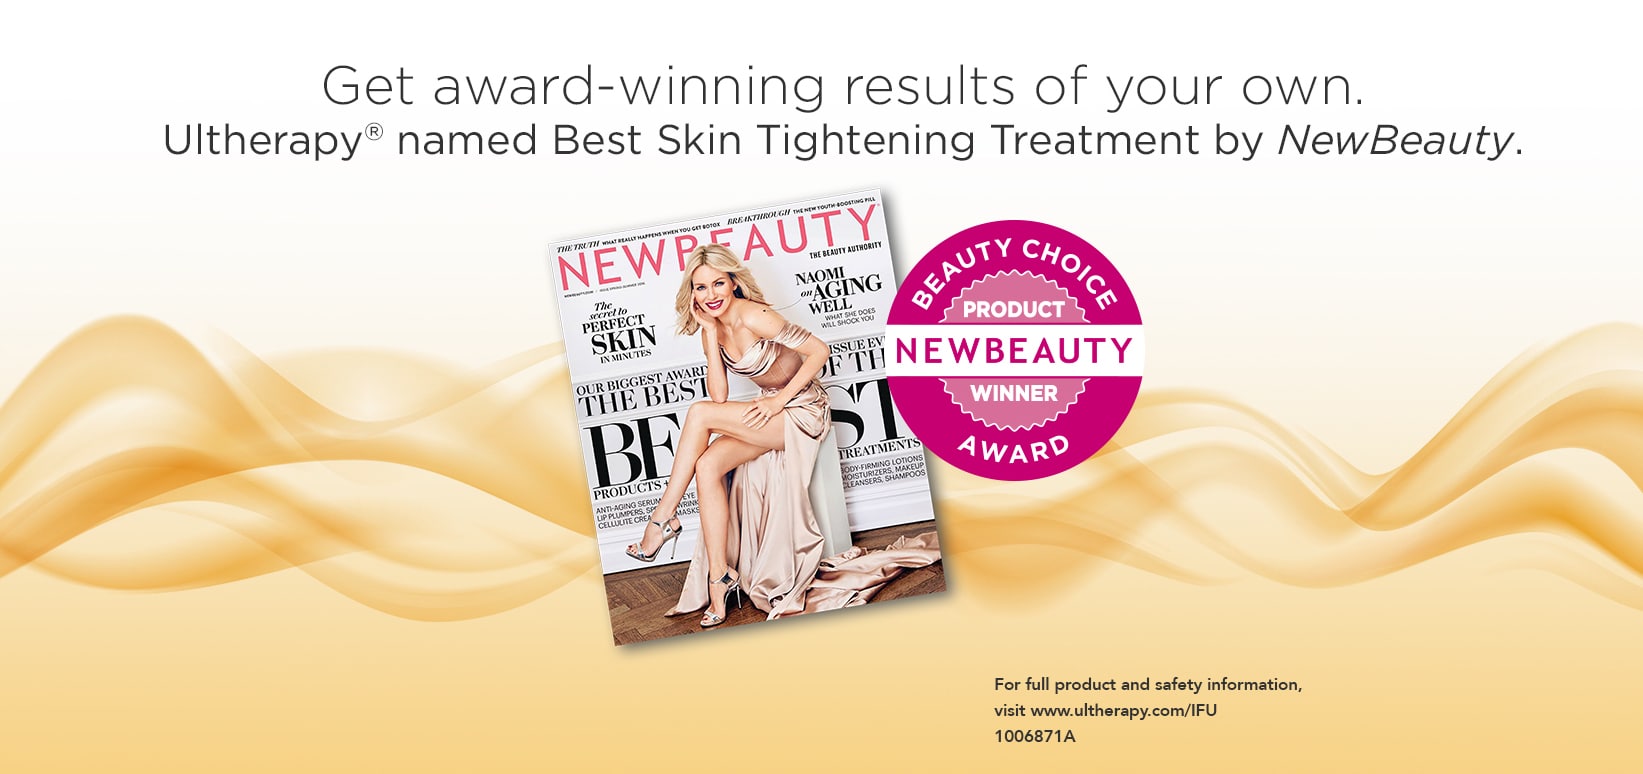 New Beauty Magazine Cover for award winning Ultherapy skin tightening treatment